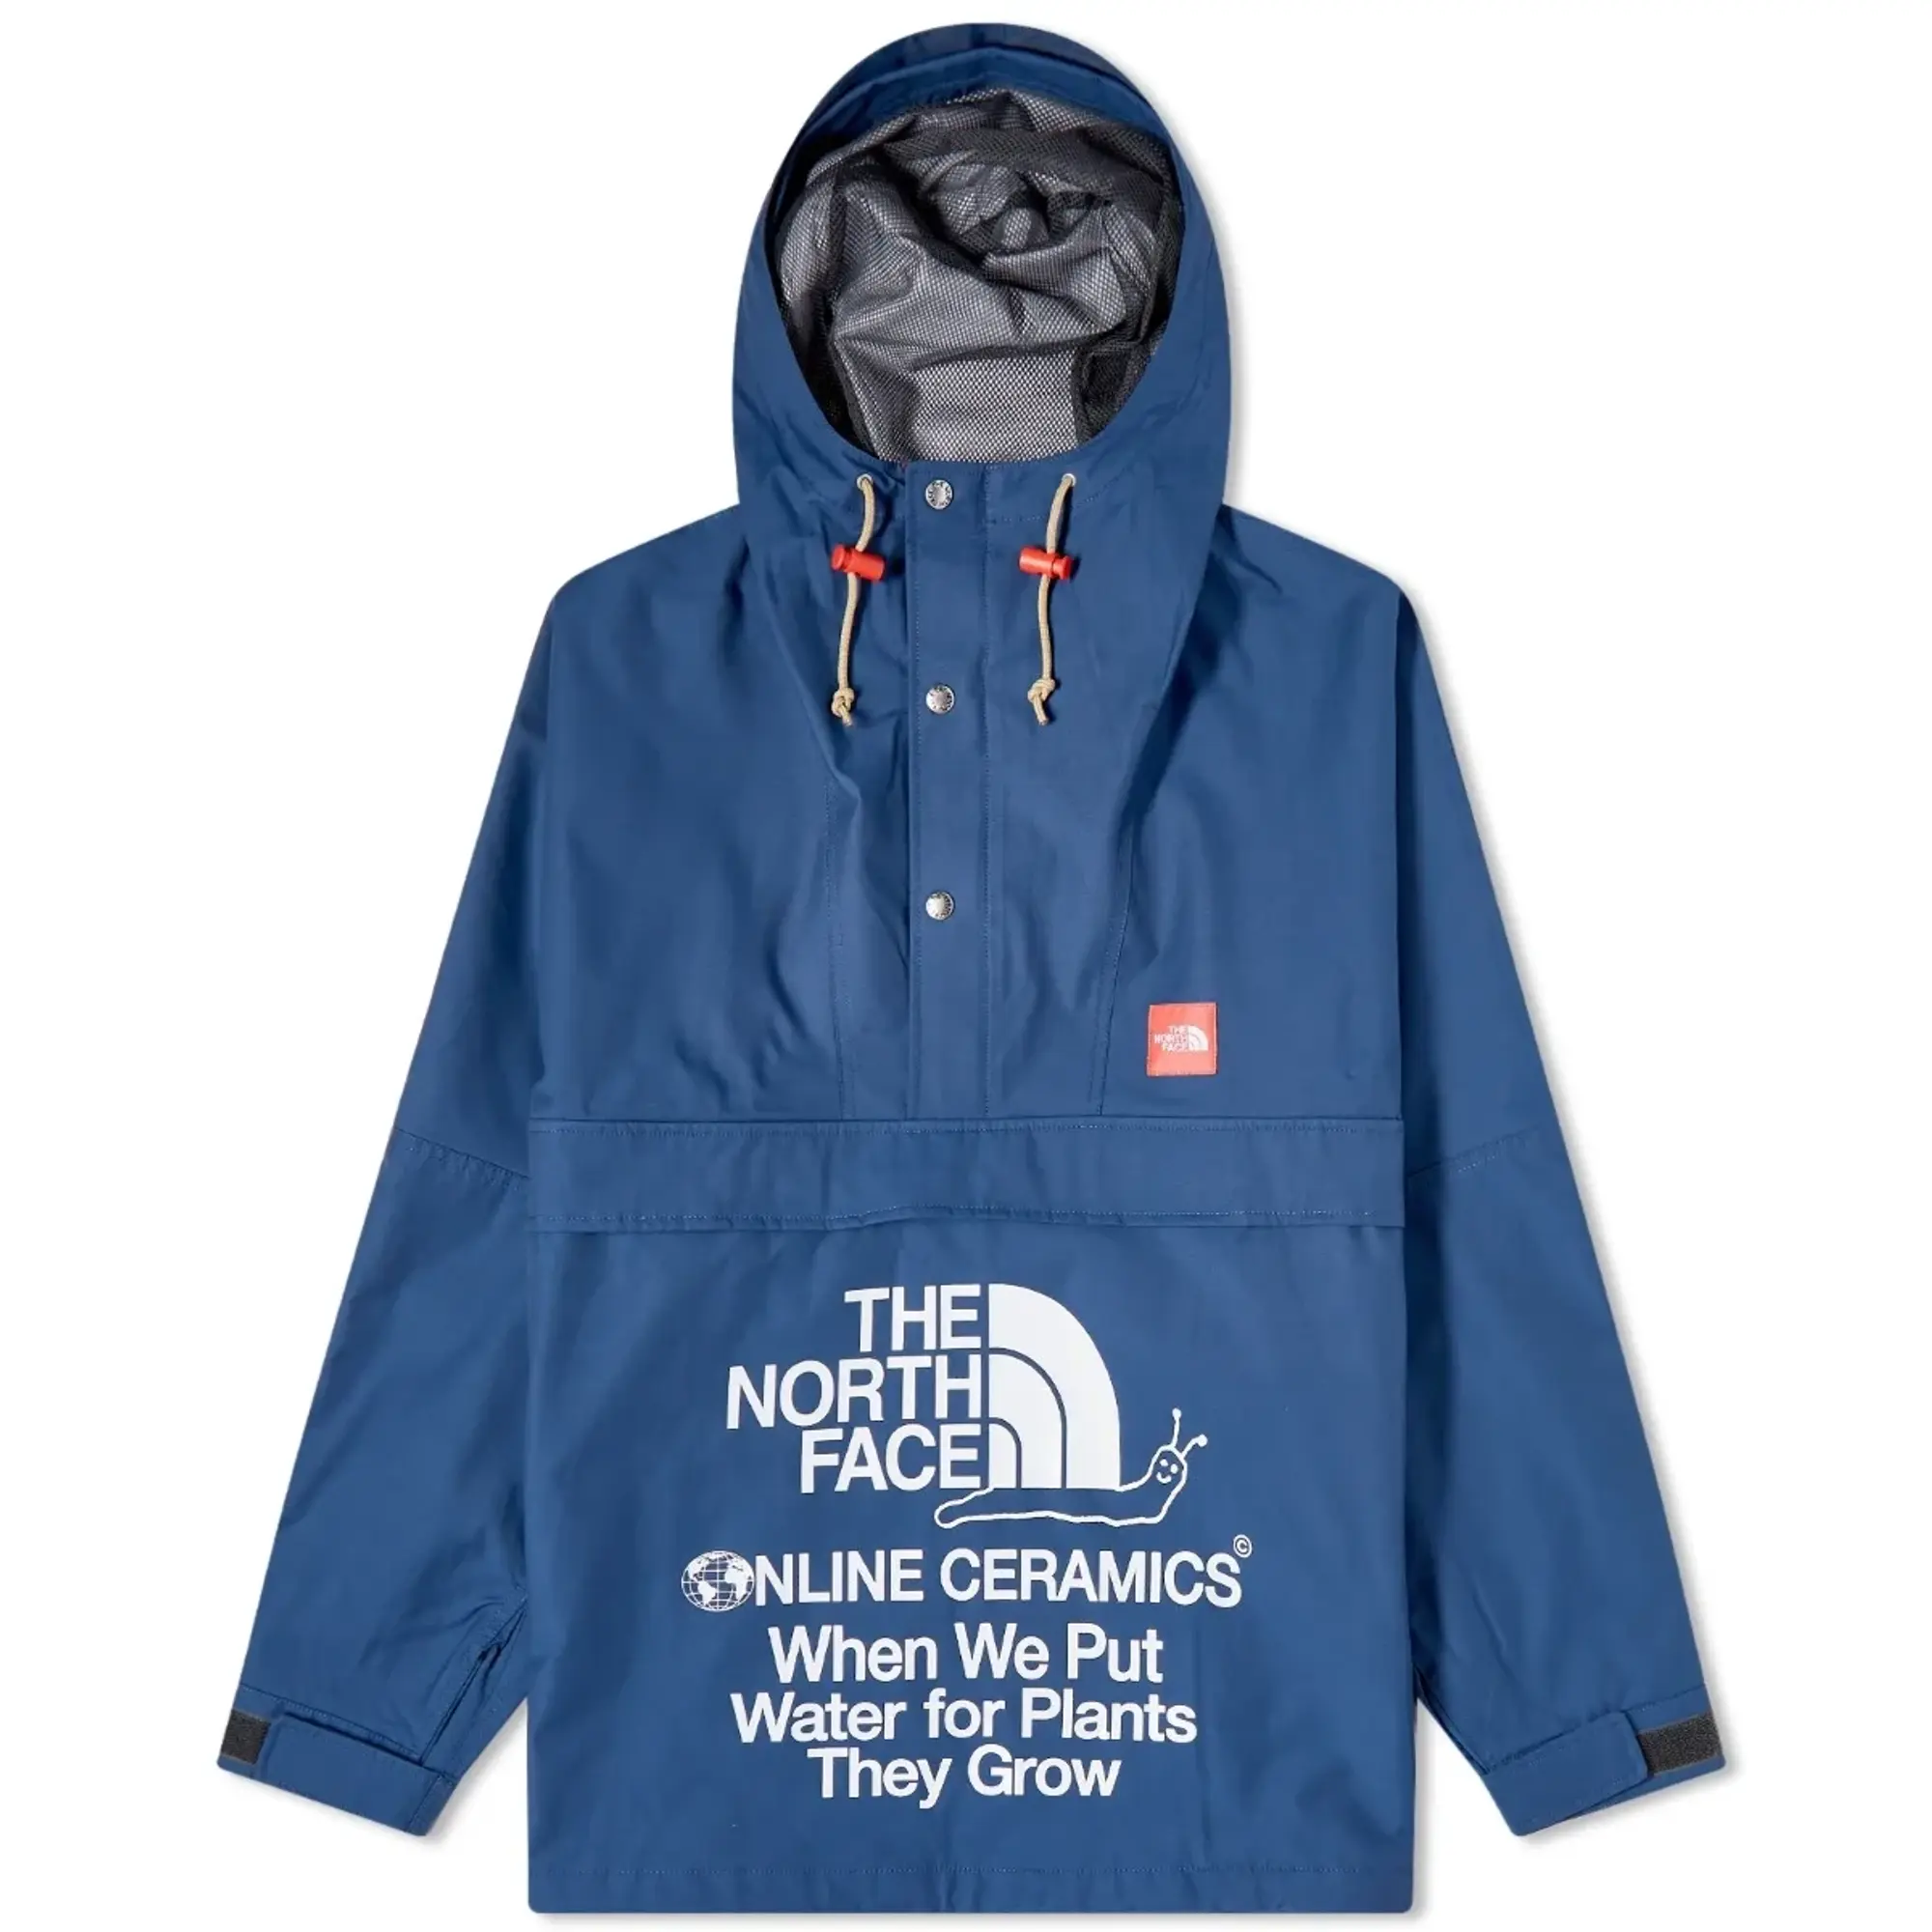 The North Face x Online Ceramics Windjammer Shady Blue